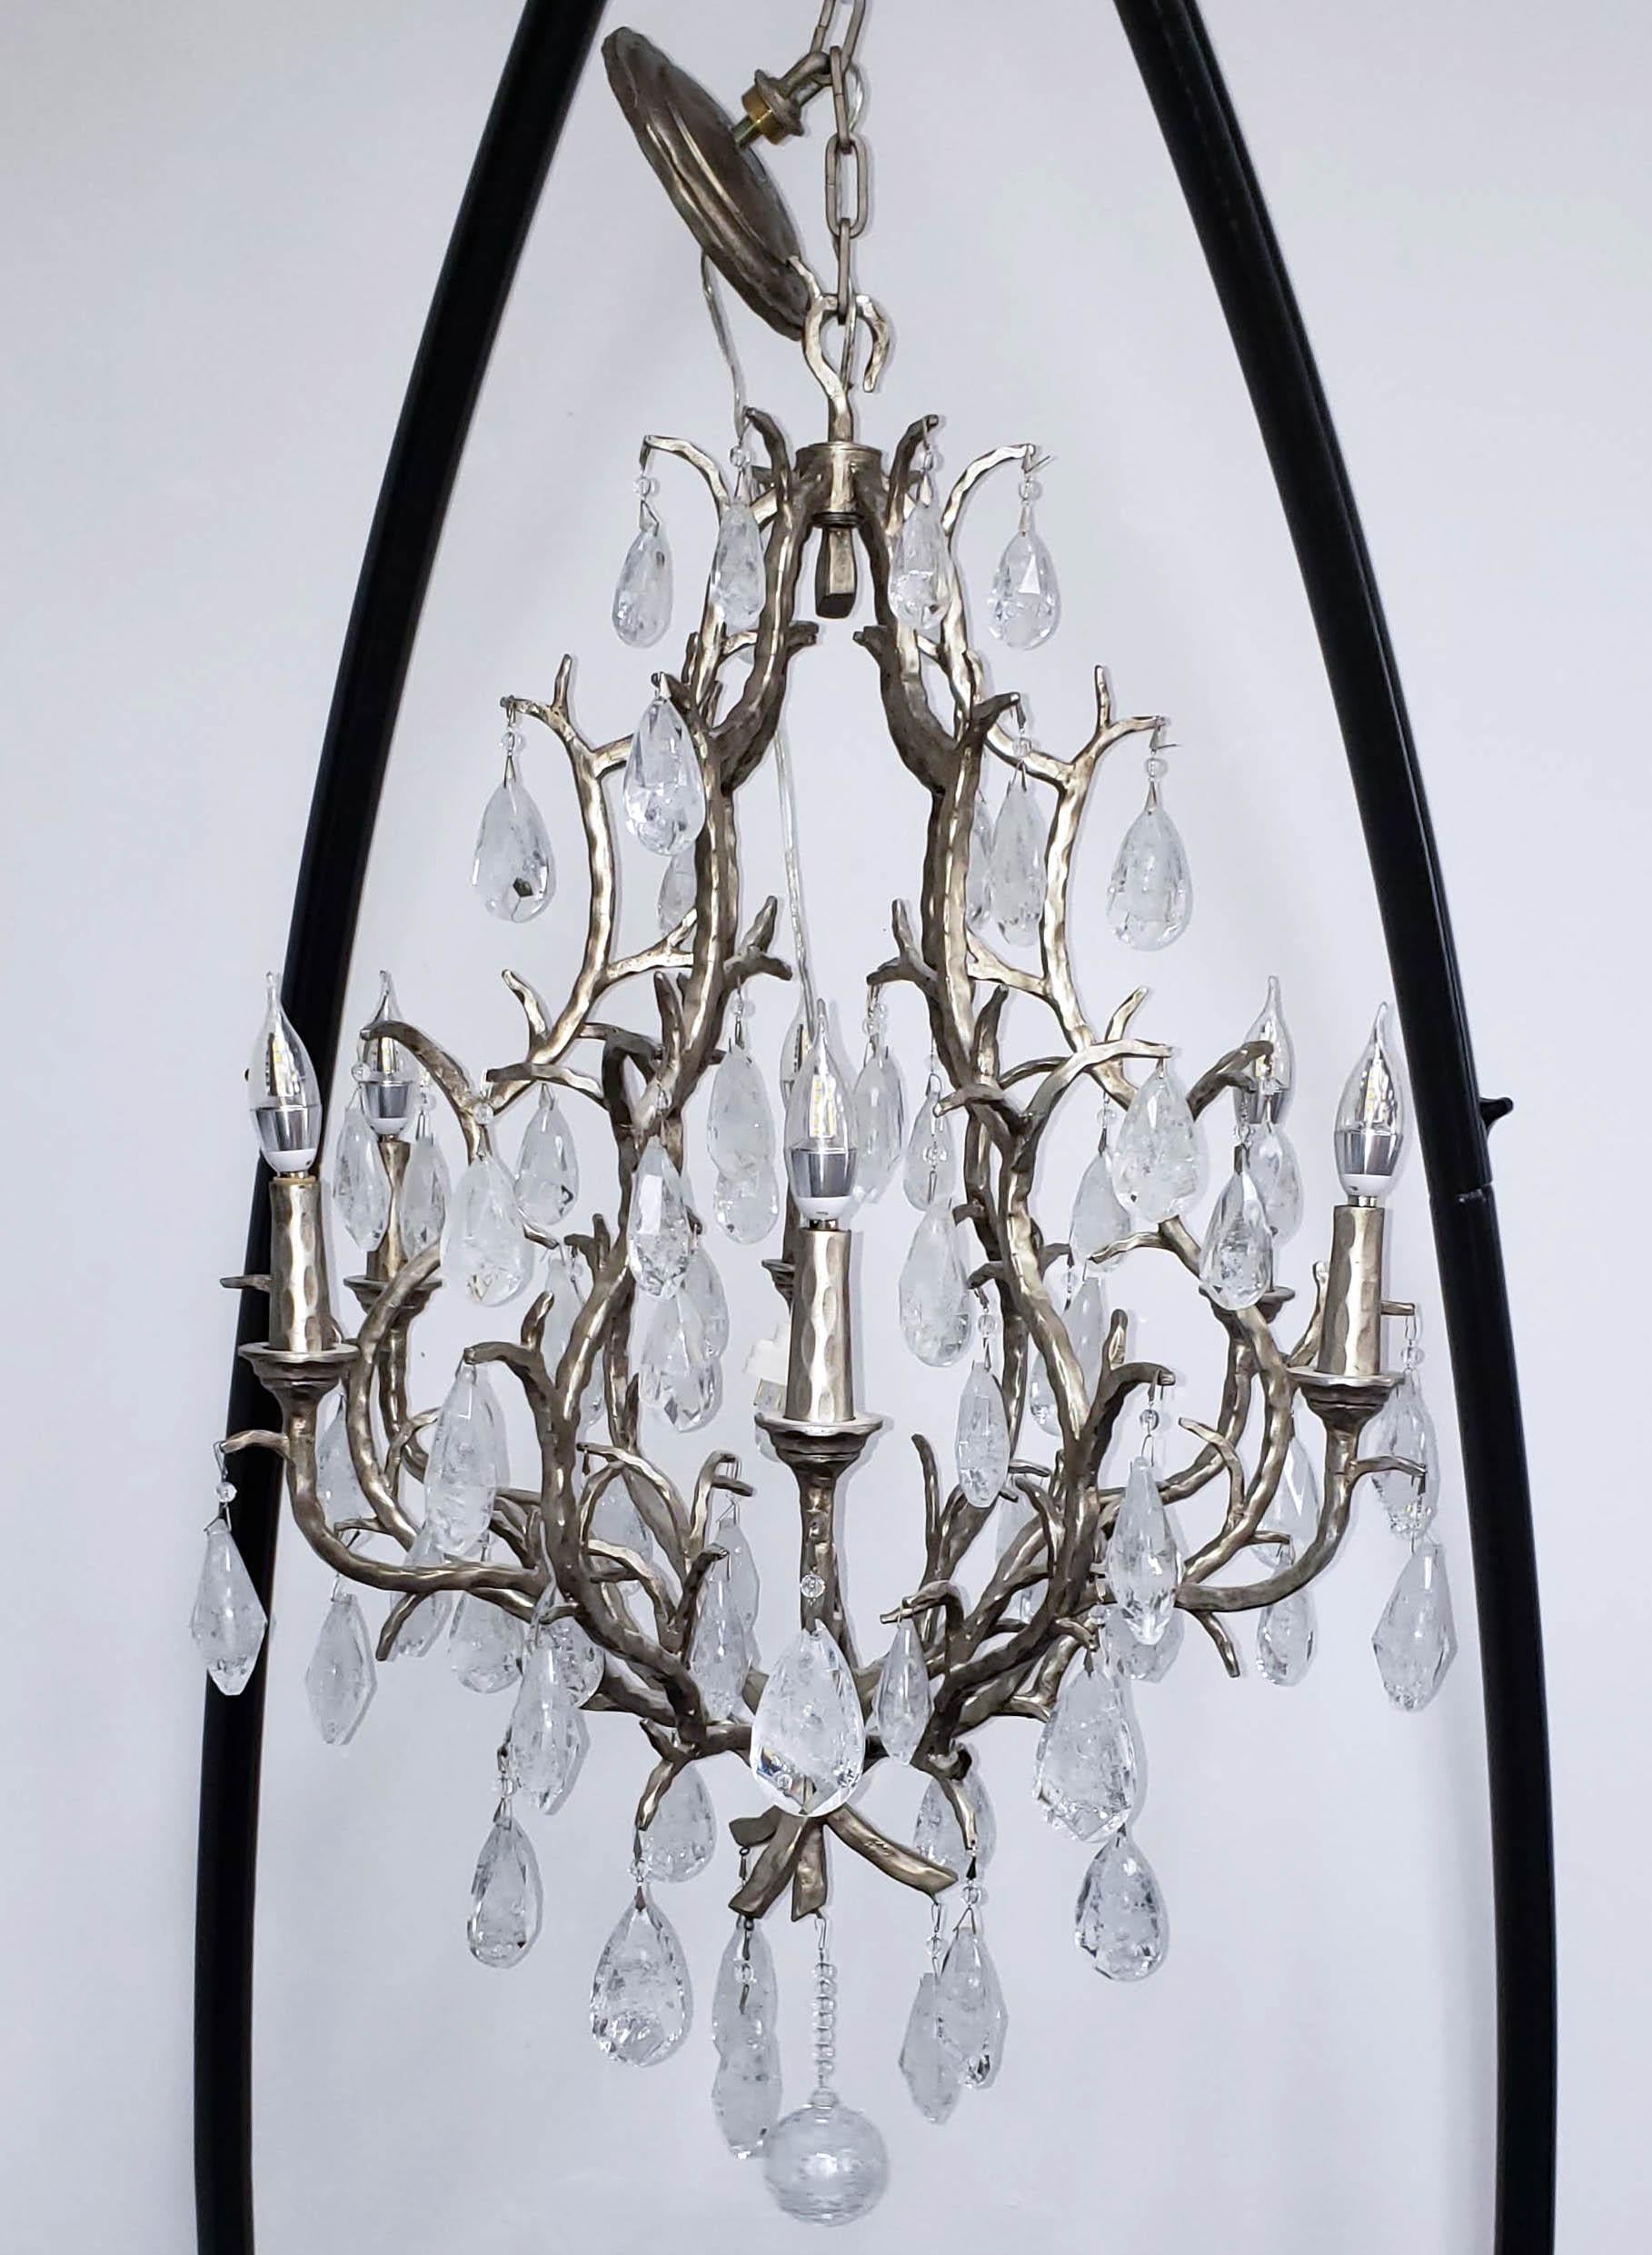 Hand-crafted iron rock crystal chandelier with six candlestick-style lights. This impressive work of functional art features rock crystal prisms that hang suspended from twig-like branches. 

COLOR: Muted silver. DIMENSIONS: 35 inches high x 25